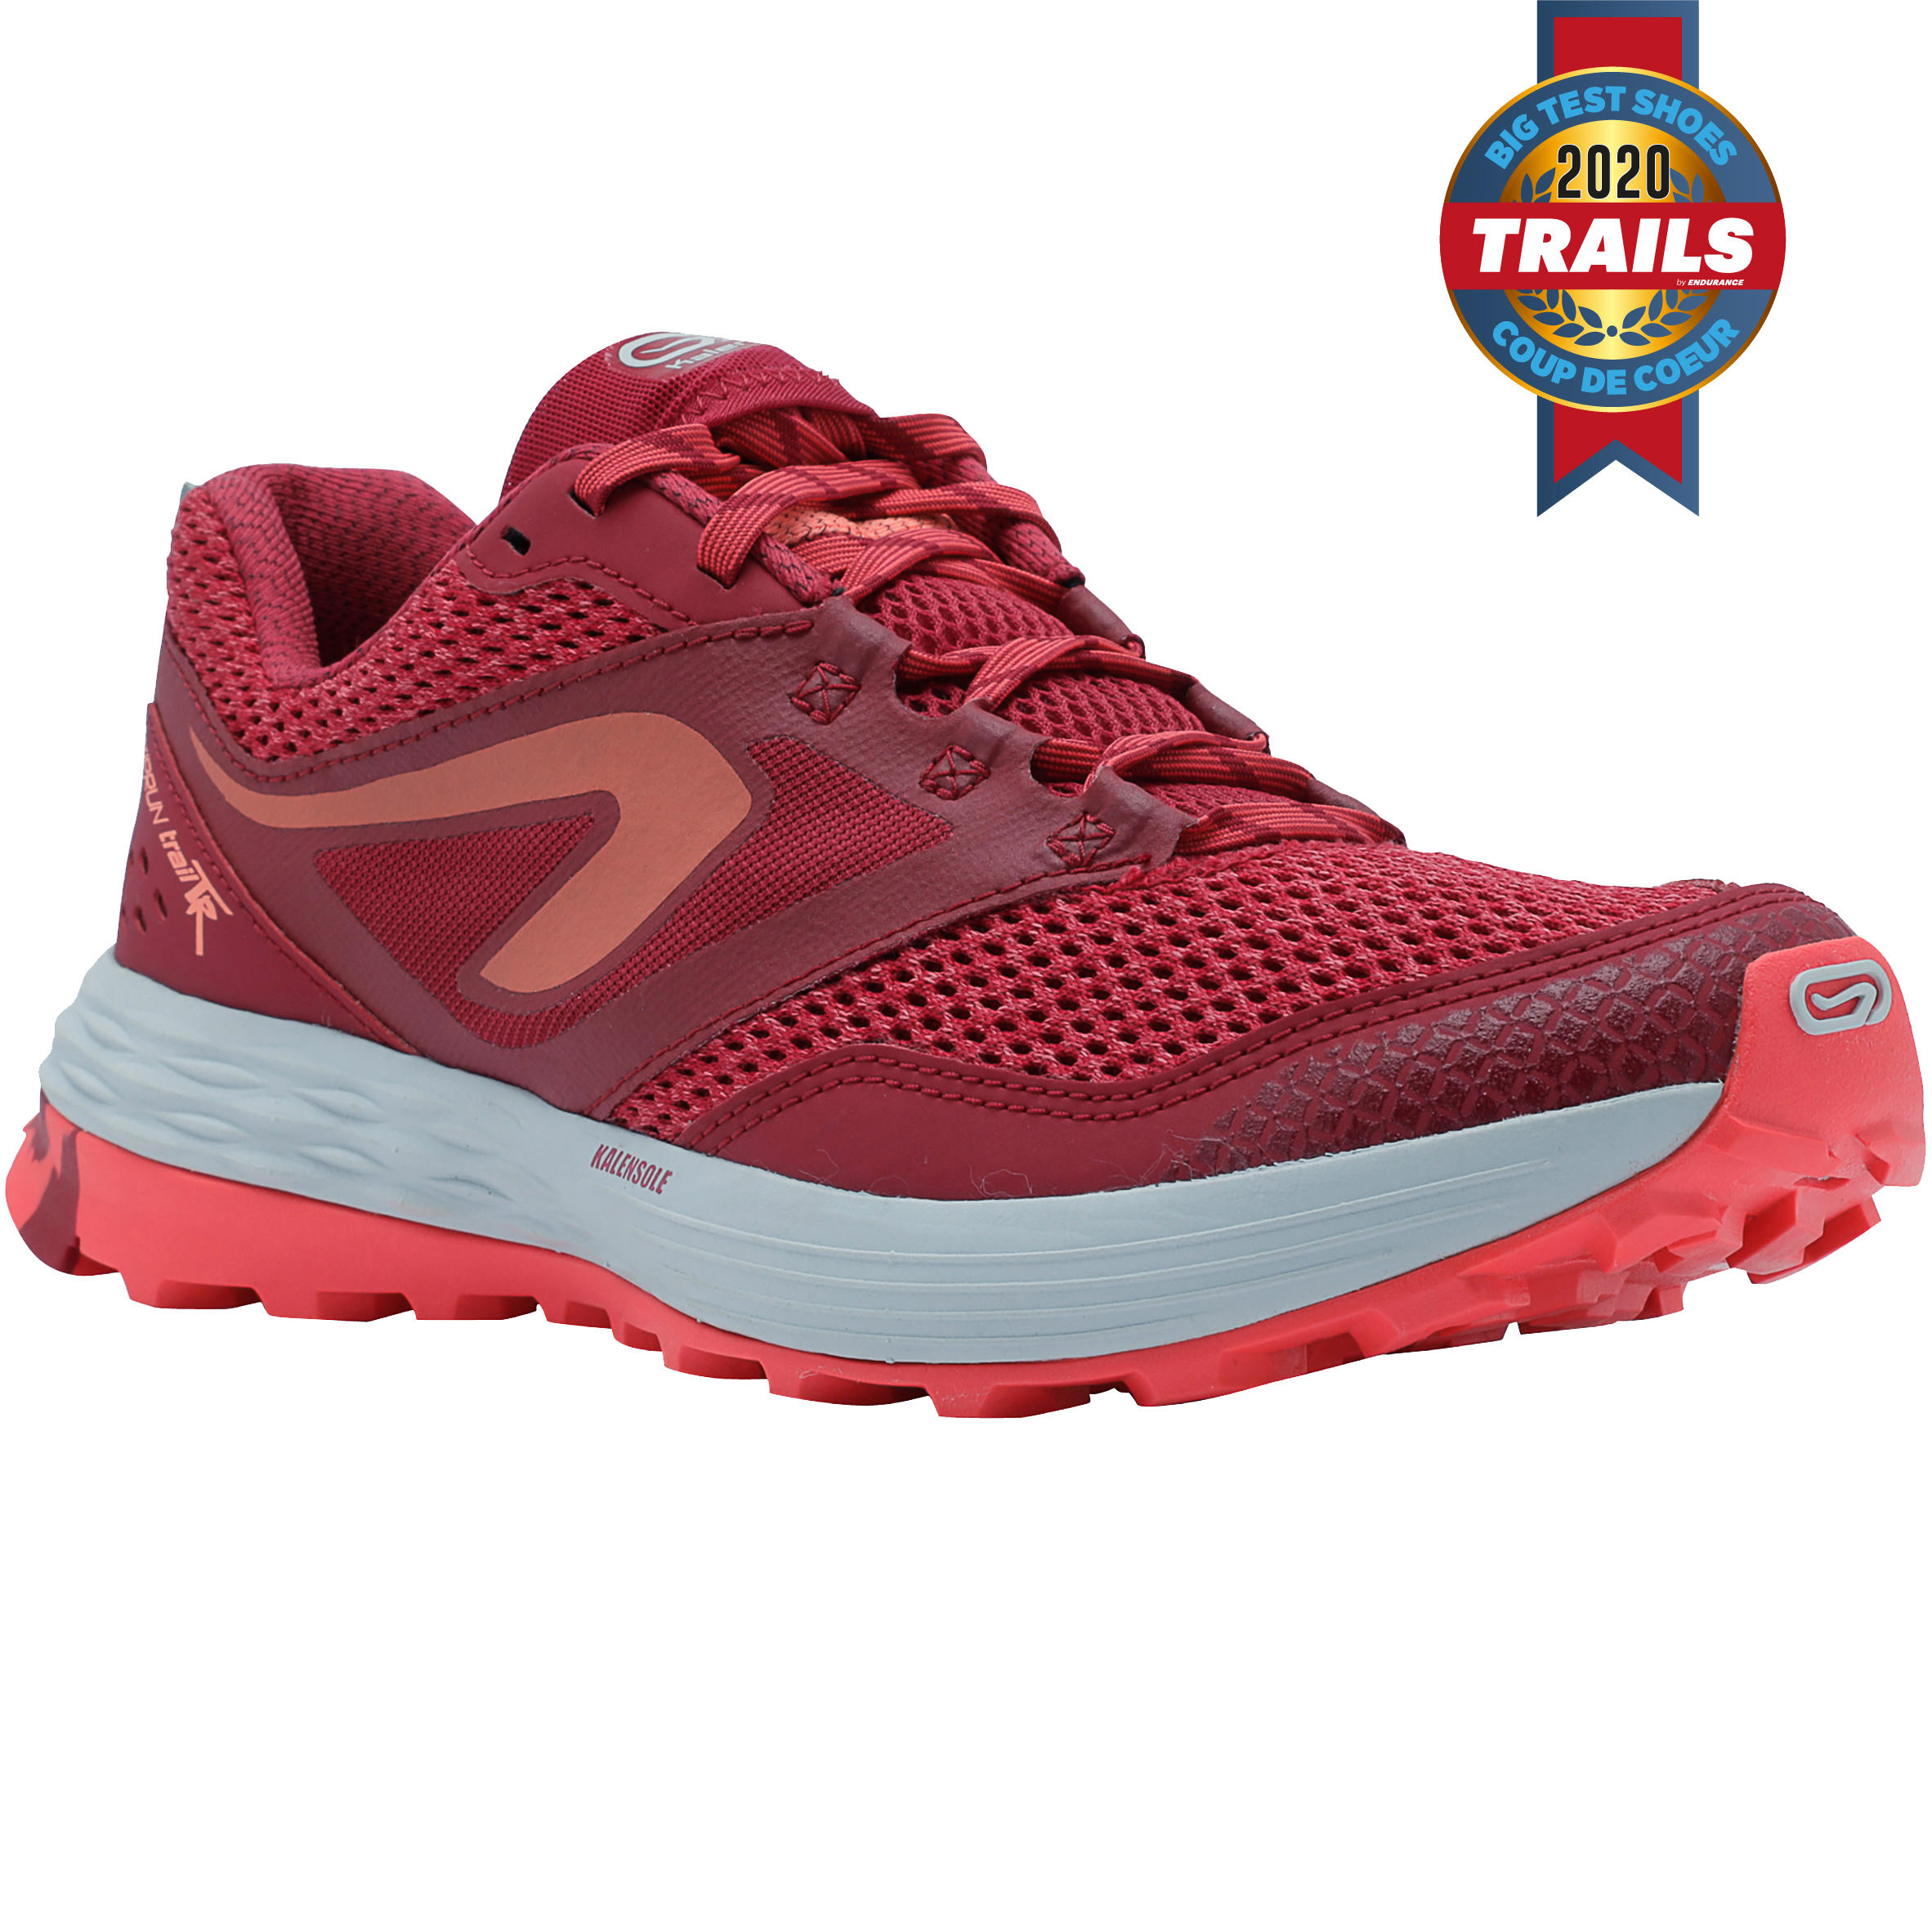 sports shoes for womens decathlon